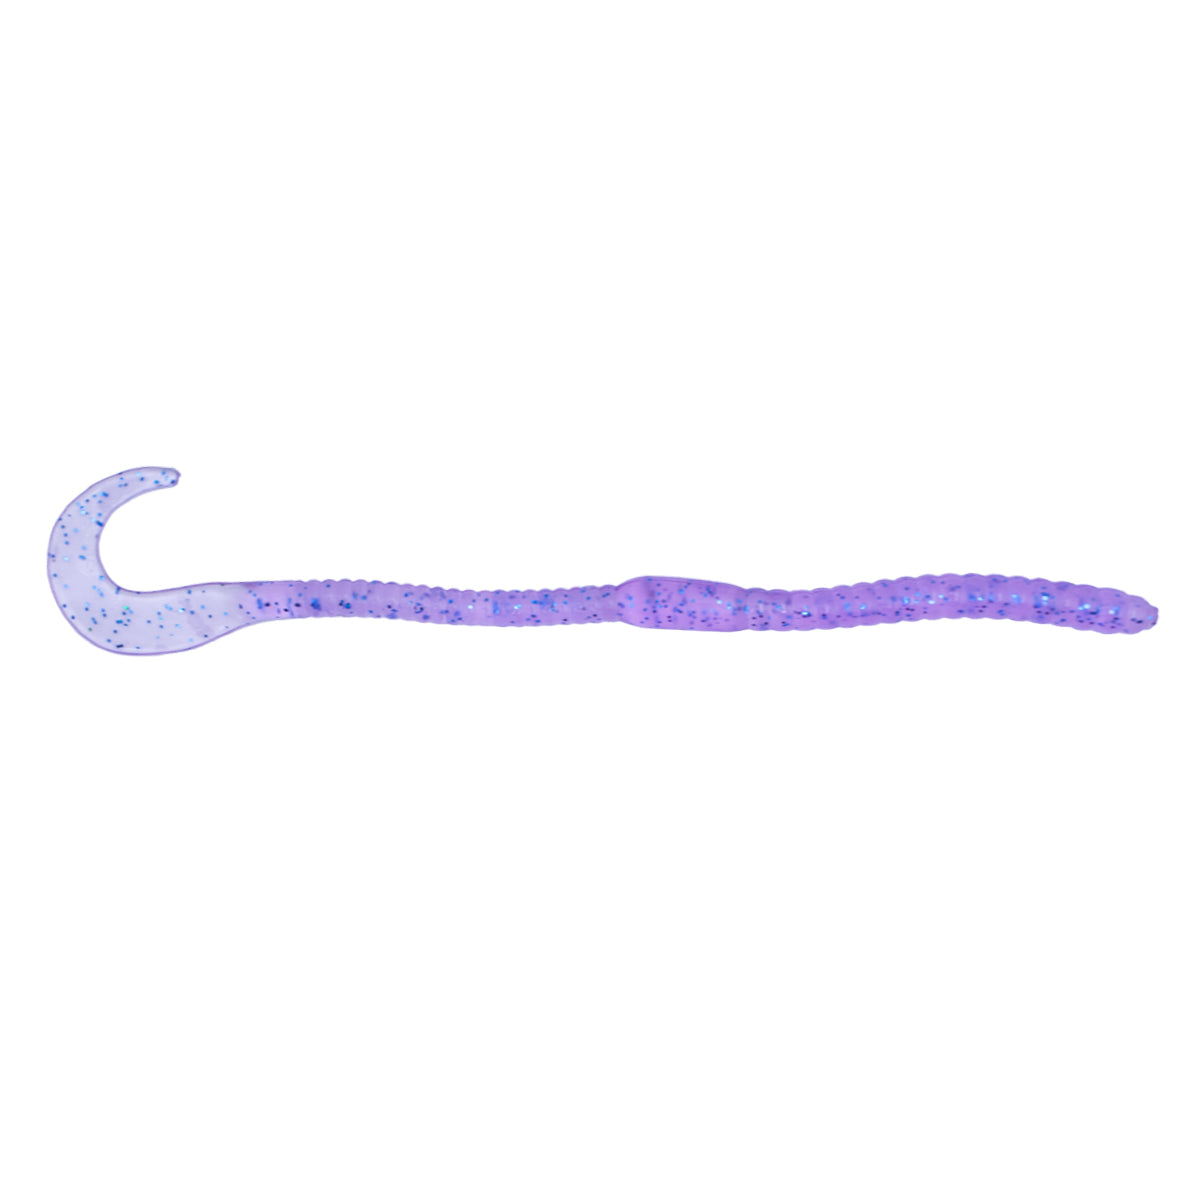 5" Curtail Worms, Pack of 12